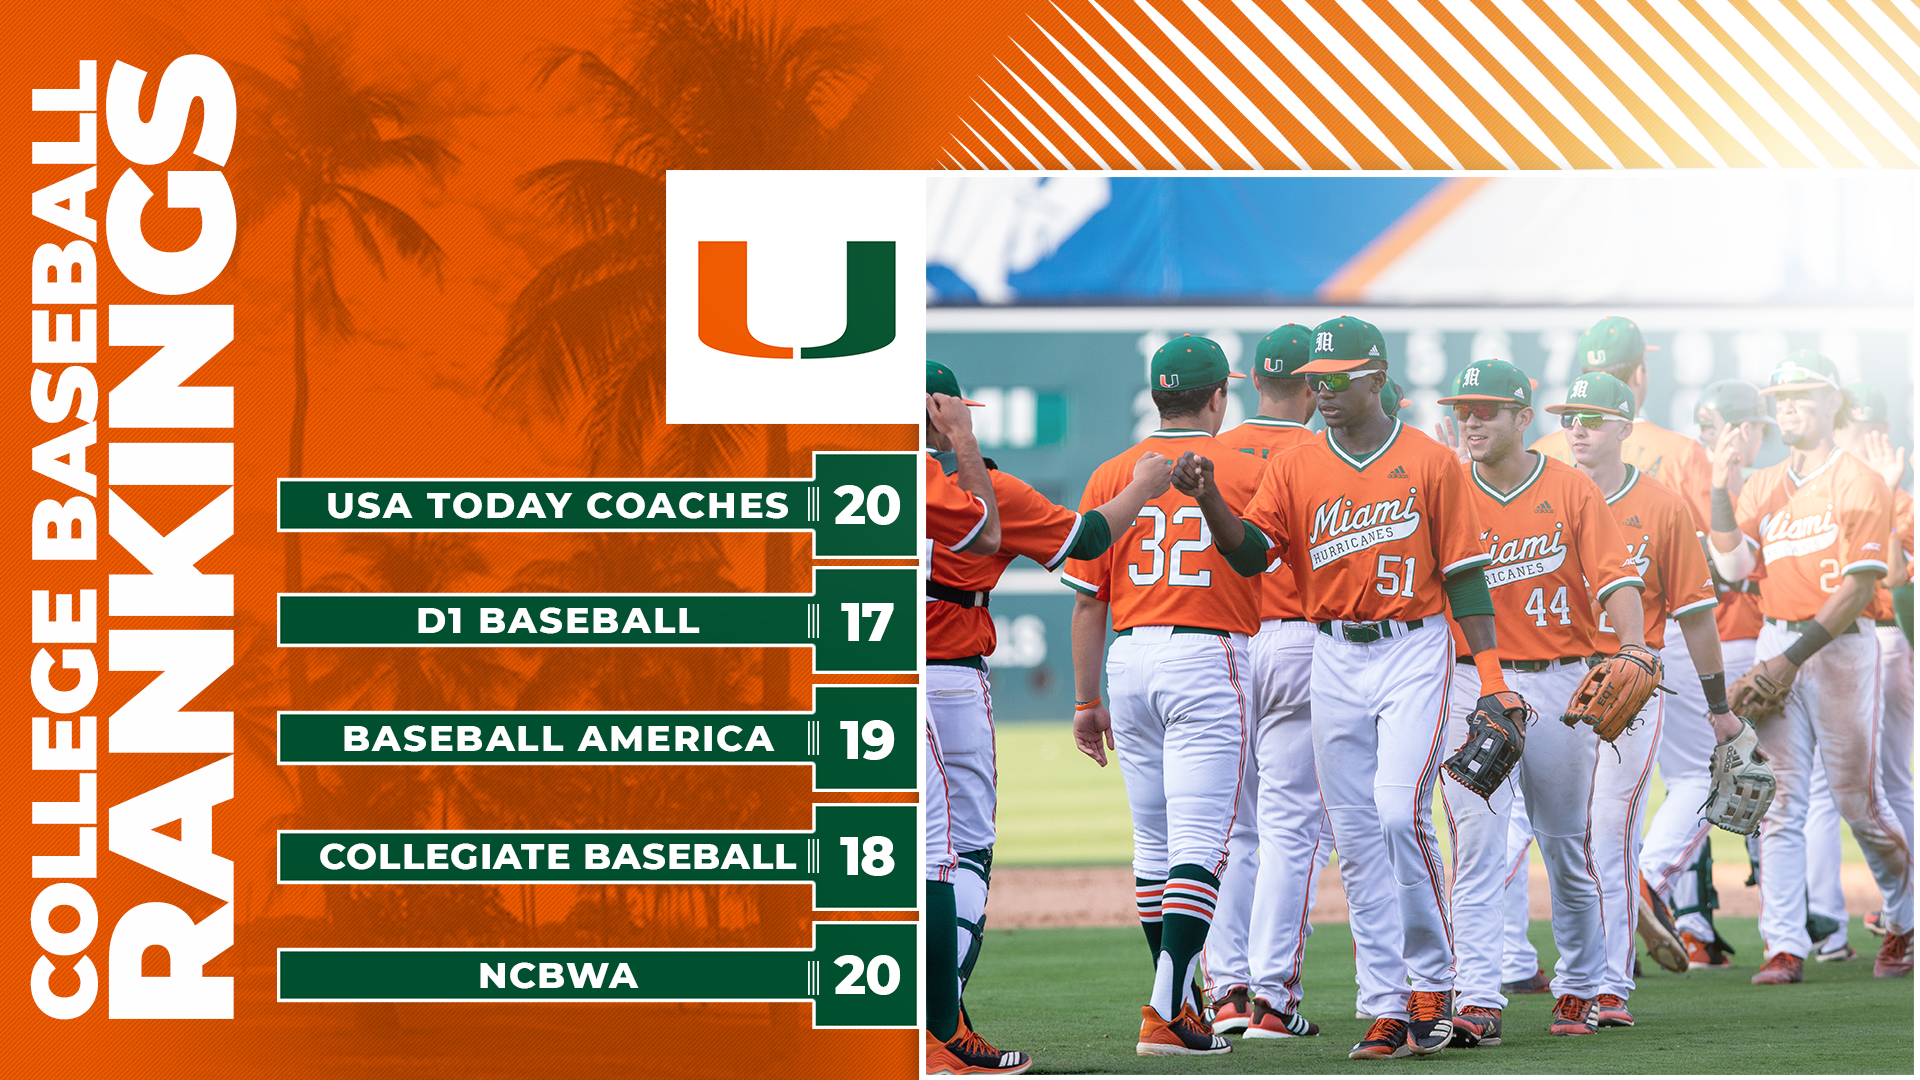 Canes Baseball Remains Ranked in Top 20